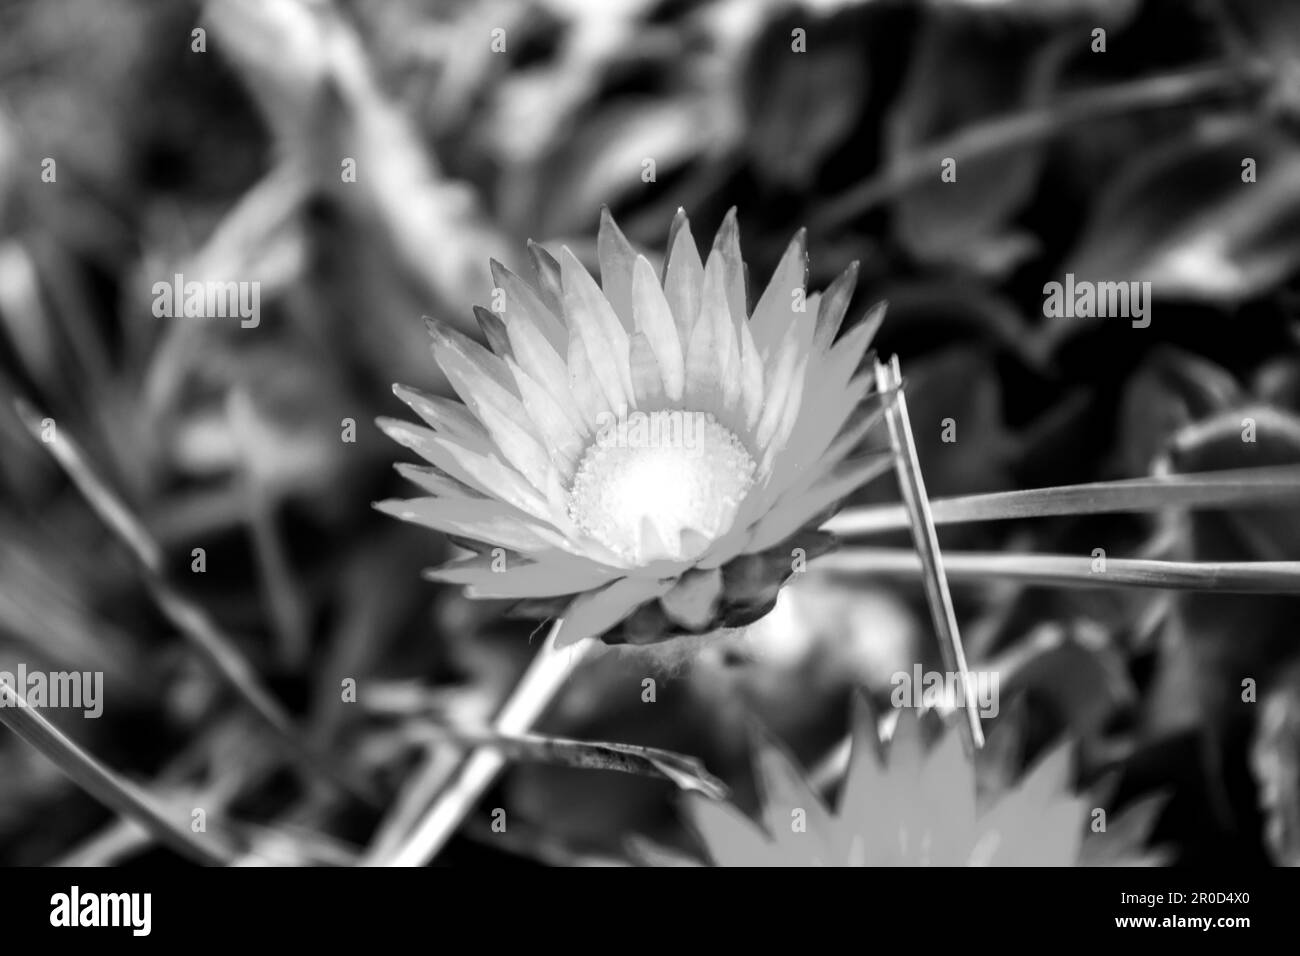 Close up of a delicate paper-like everlasting, in black and white, also known as a strawflower Stock Photo